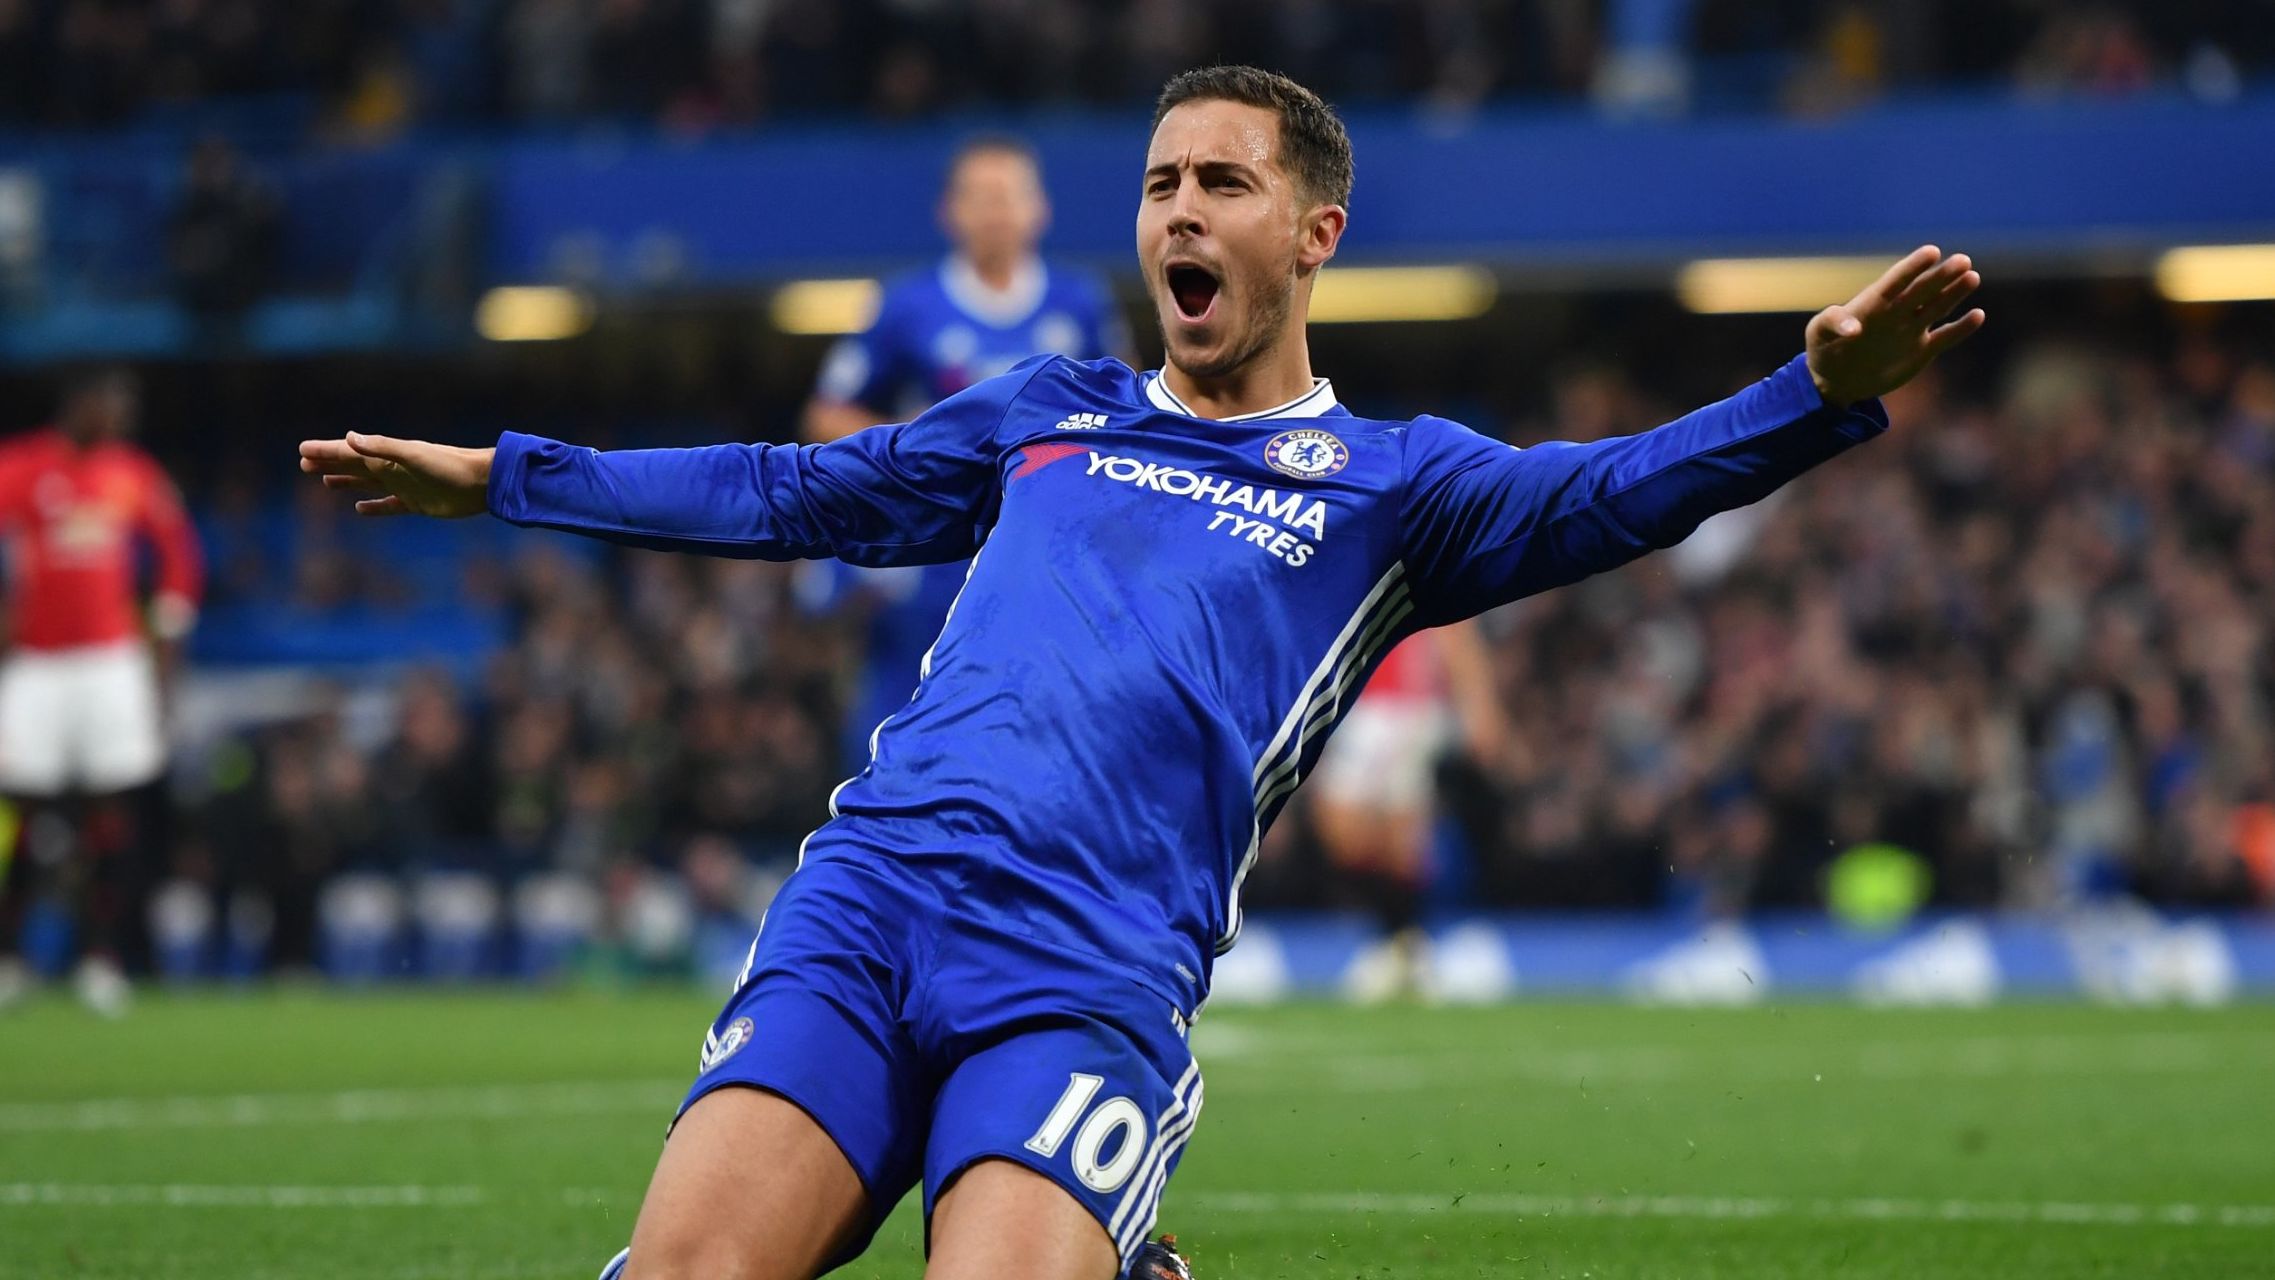 Man of the match Eden Hazard put the game out of reach for Manchester United by scoring Chelsea's third. 